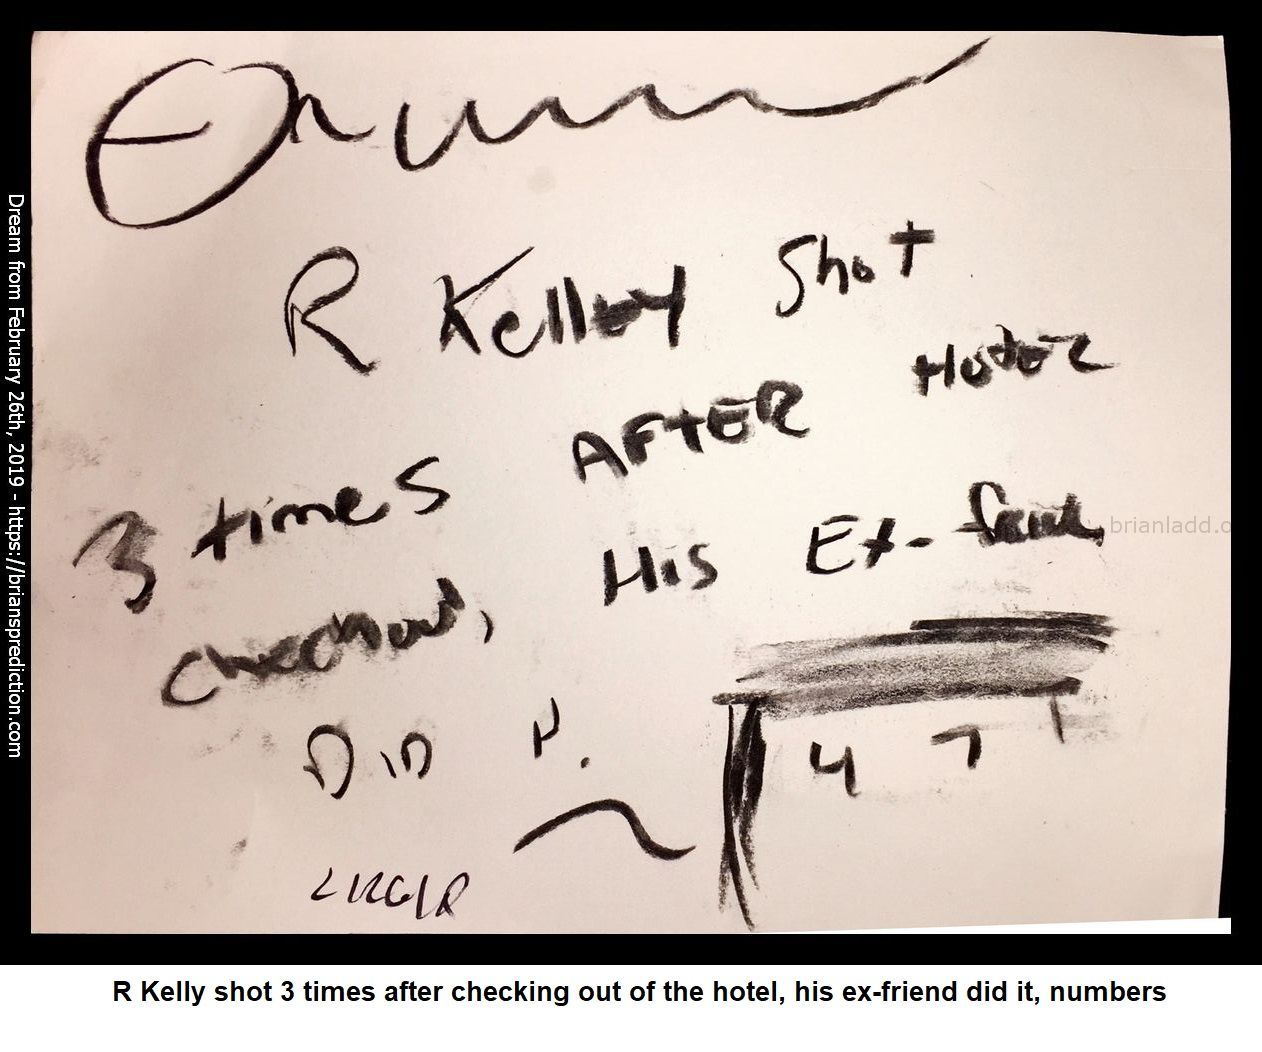 11733 26 February 2019 2 - R Kelly Shot 3 Times After Checking Out Of The Hotel, His Ex-Friend Did It, Numbers  Dream Nu...
R Kelly Shot 3 Times After Checking Out Of The Hotel, His Ex-Friend Did It, Numbers  Dream Number 11733 26 February 2019 2 Psychic Prediction
